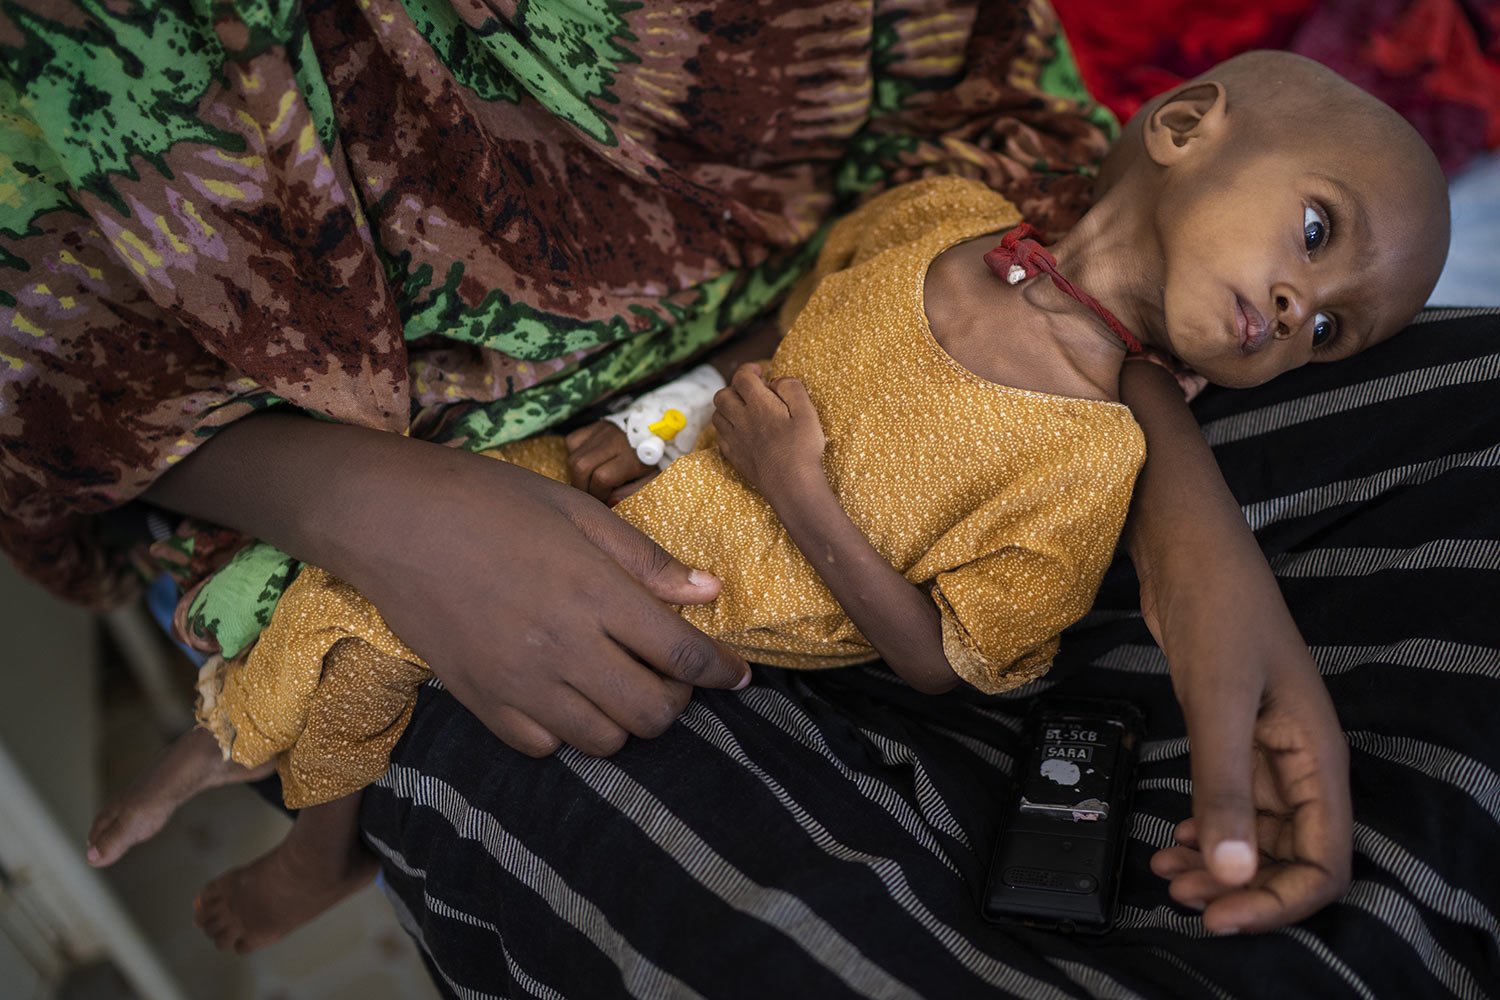  Hamdi Yusuf, a malnourished child, is held by her mother in Dollow, Somalia, Sept. 21, 2022. Yusuf was little more than skin and bones when her mother found her unconscious, two months after arriving in the camps and living on scraps of food offered